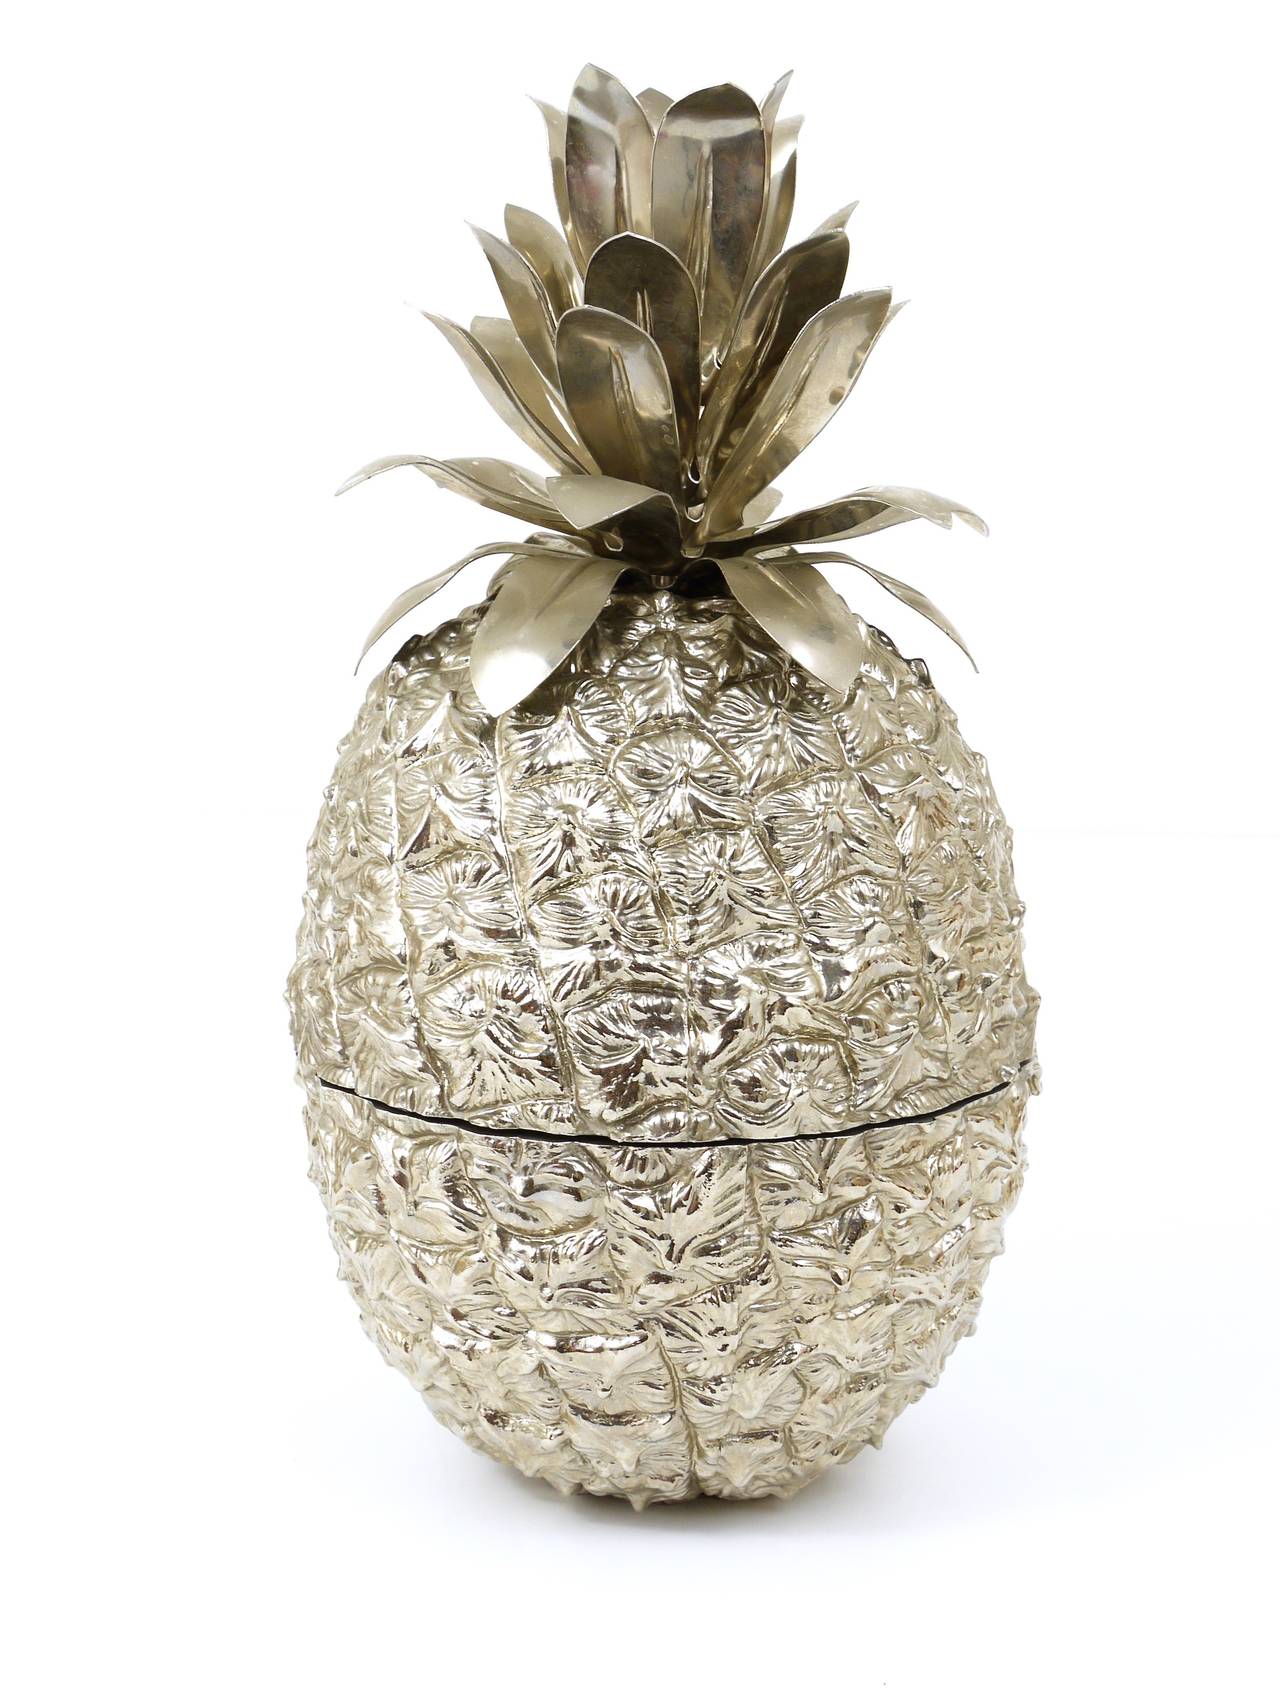 A beautiful pineapple ice bucket in the style of Maro Manetti. Made in Italy in the 1970s. Made of silver metal and plastic, in excellent condition.